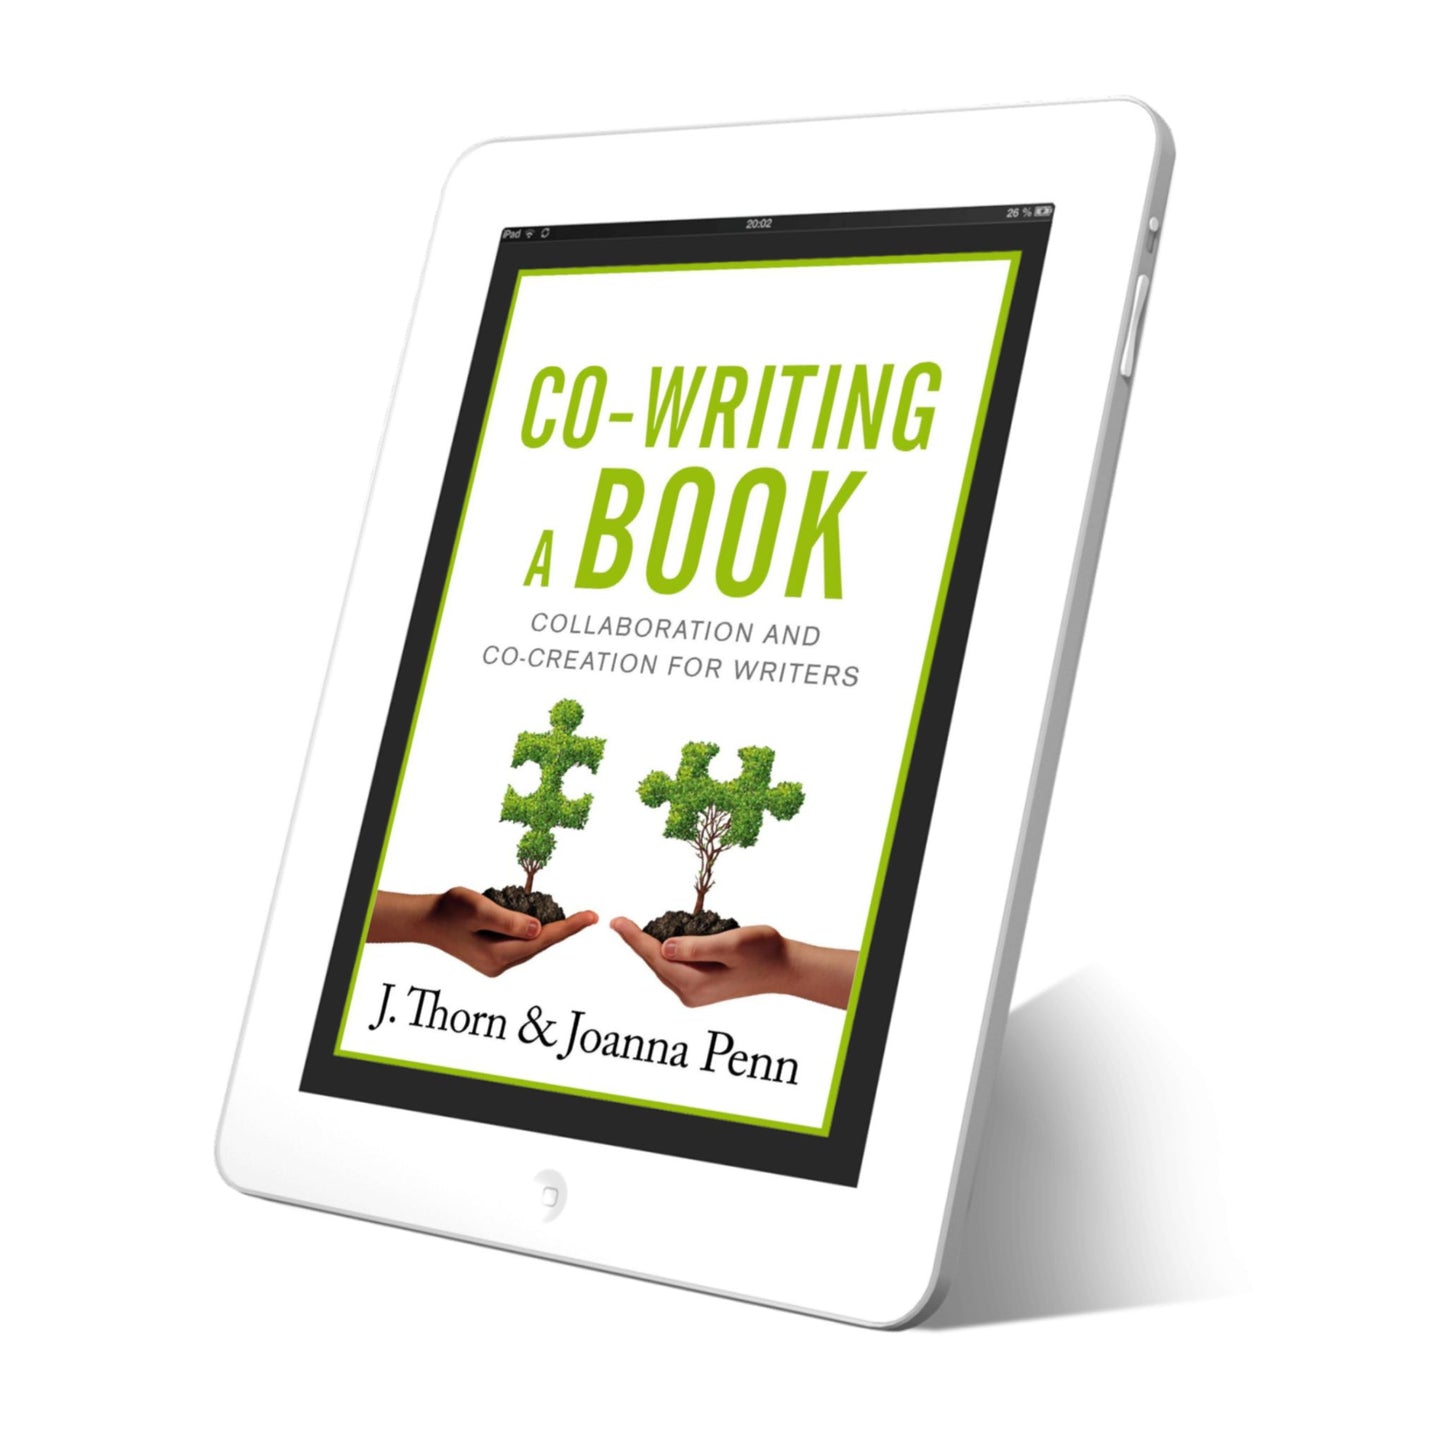 Co-Writing A Book: Collaboration and Co-Creation for Authors Ebook